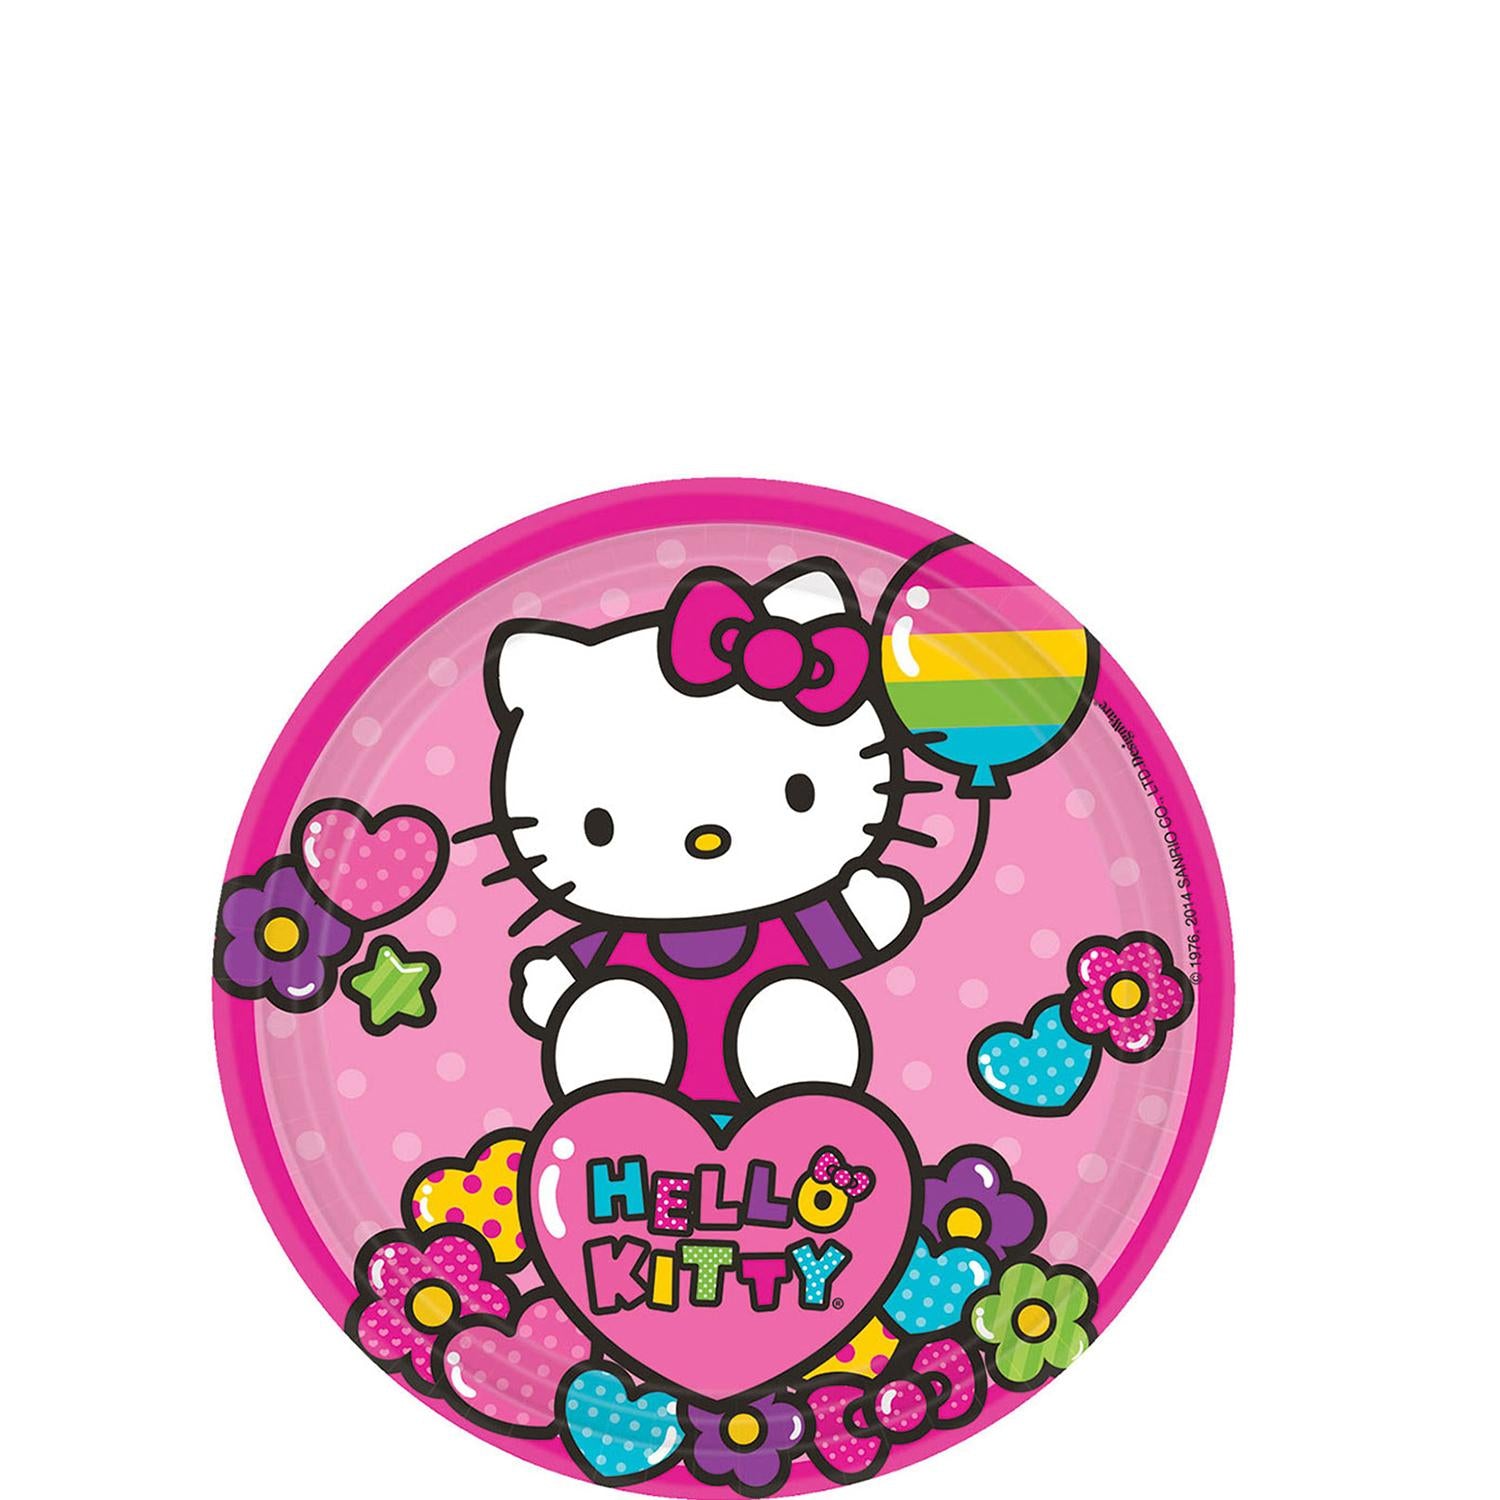 Hello Kitty Rainbow Round Plates 7in, 8pcs Printed Tableware - Party Centre